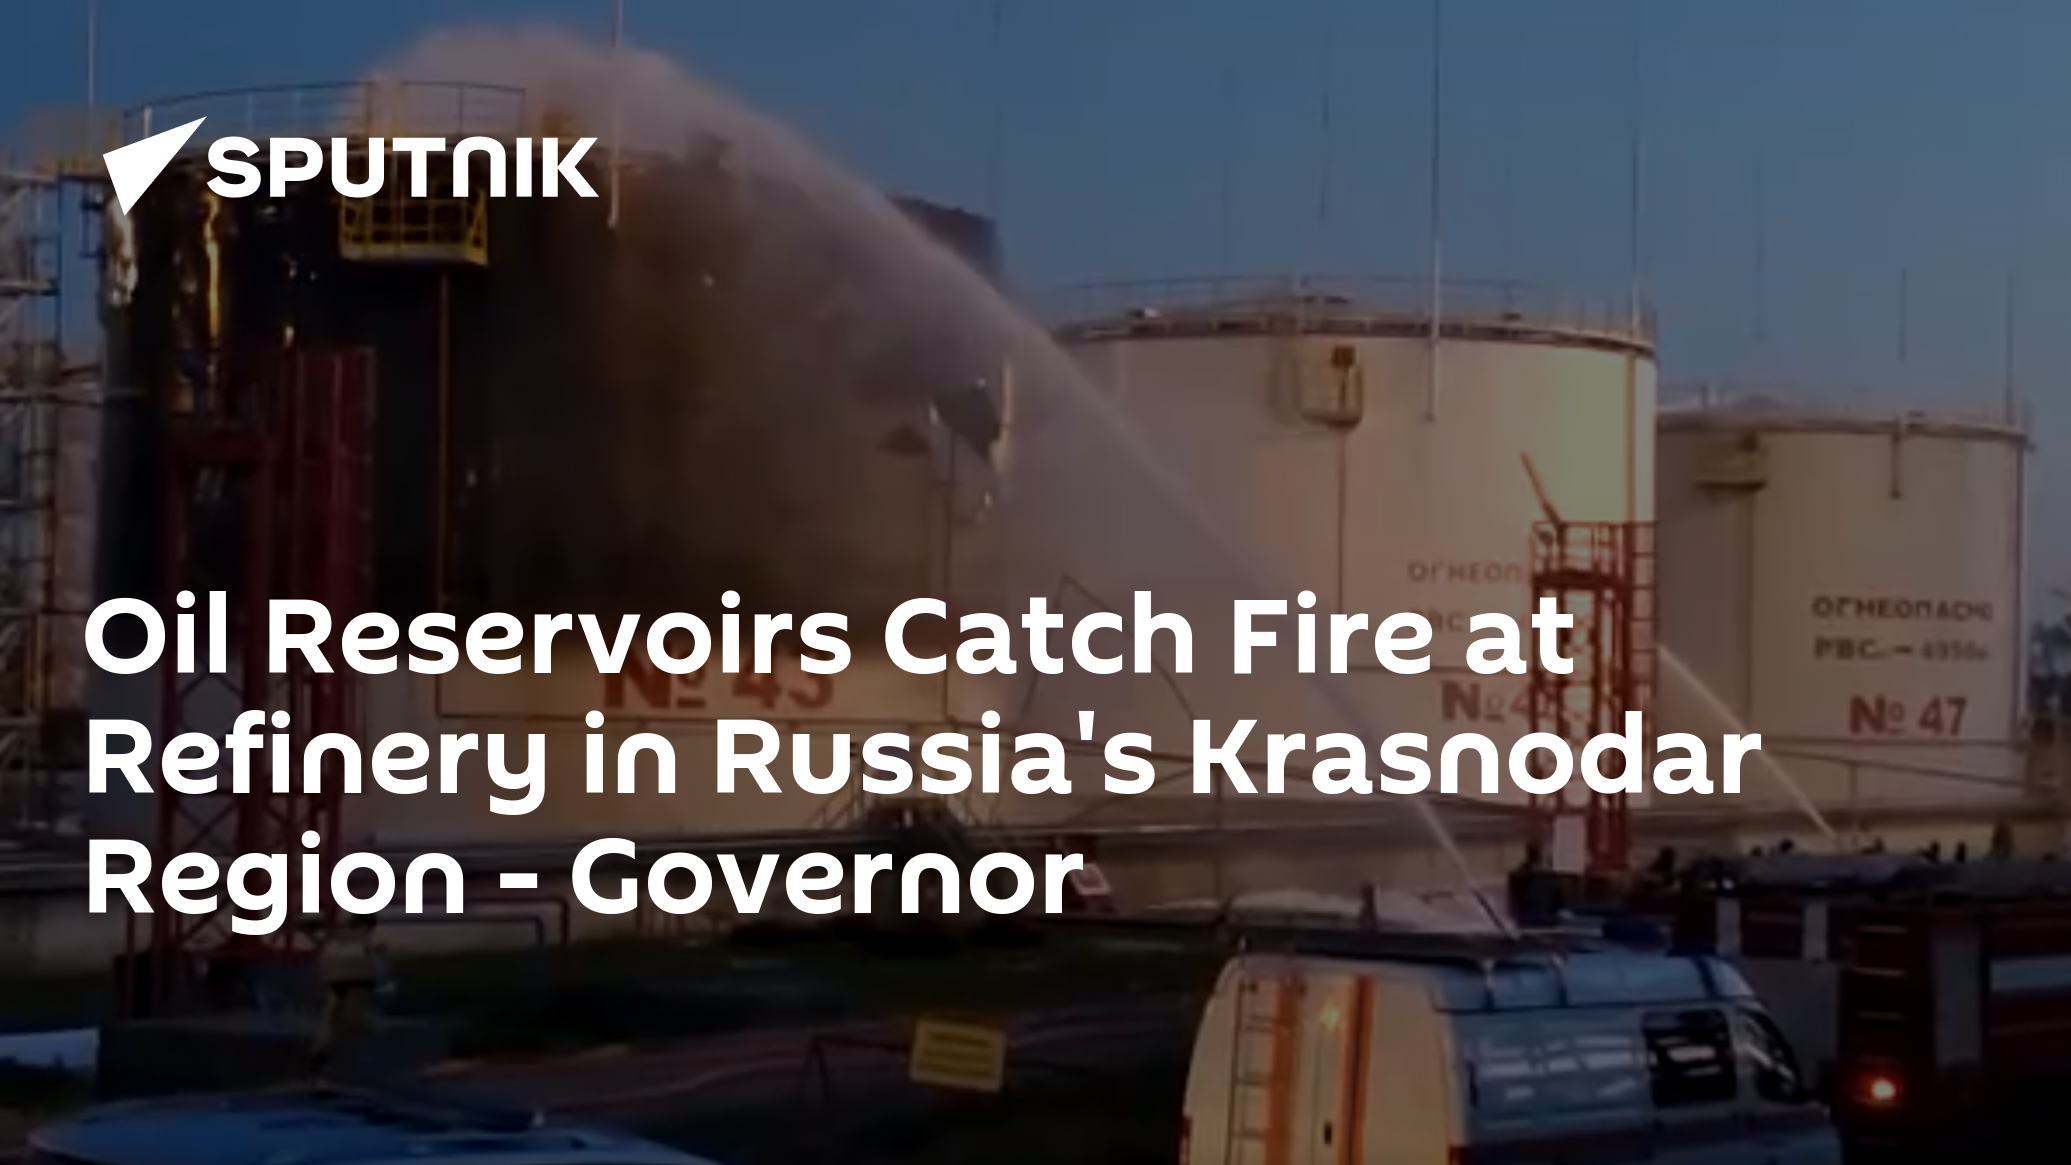 Oil Reservoirs Catch Fire at Refinery in Russia's Krasnodar Region – Governor